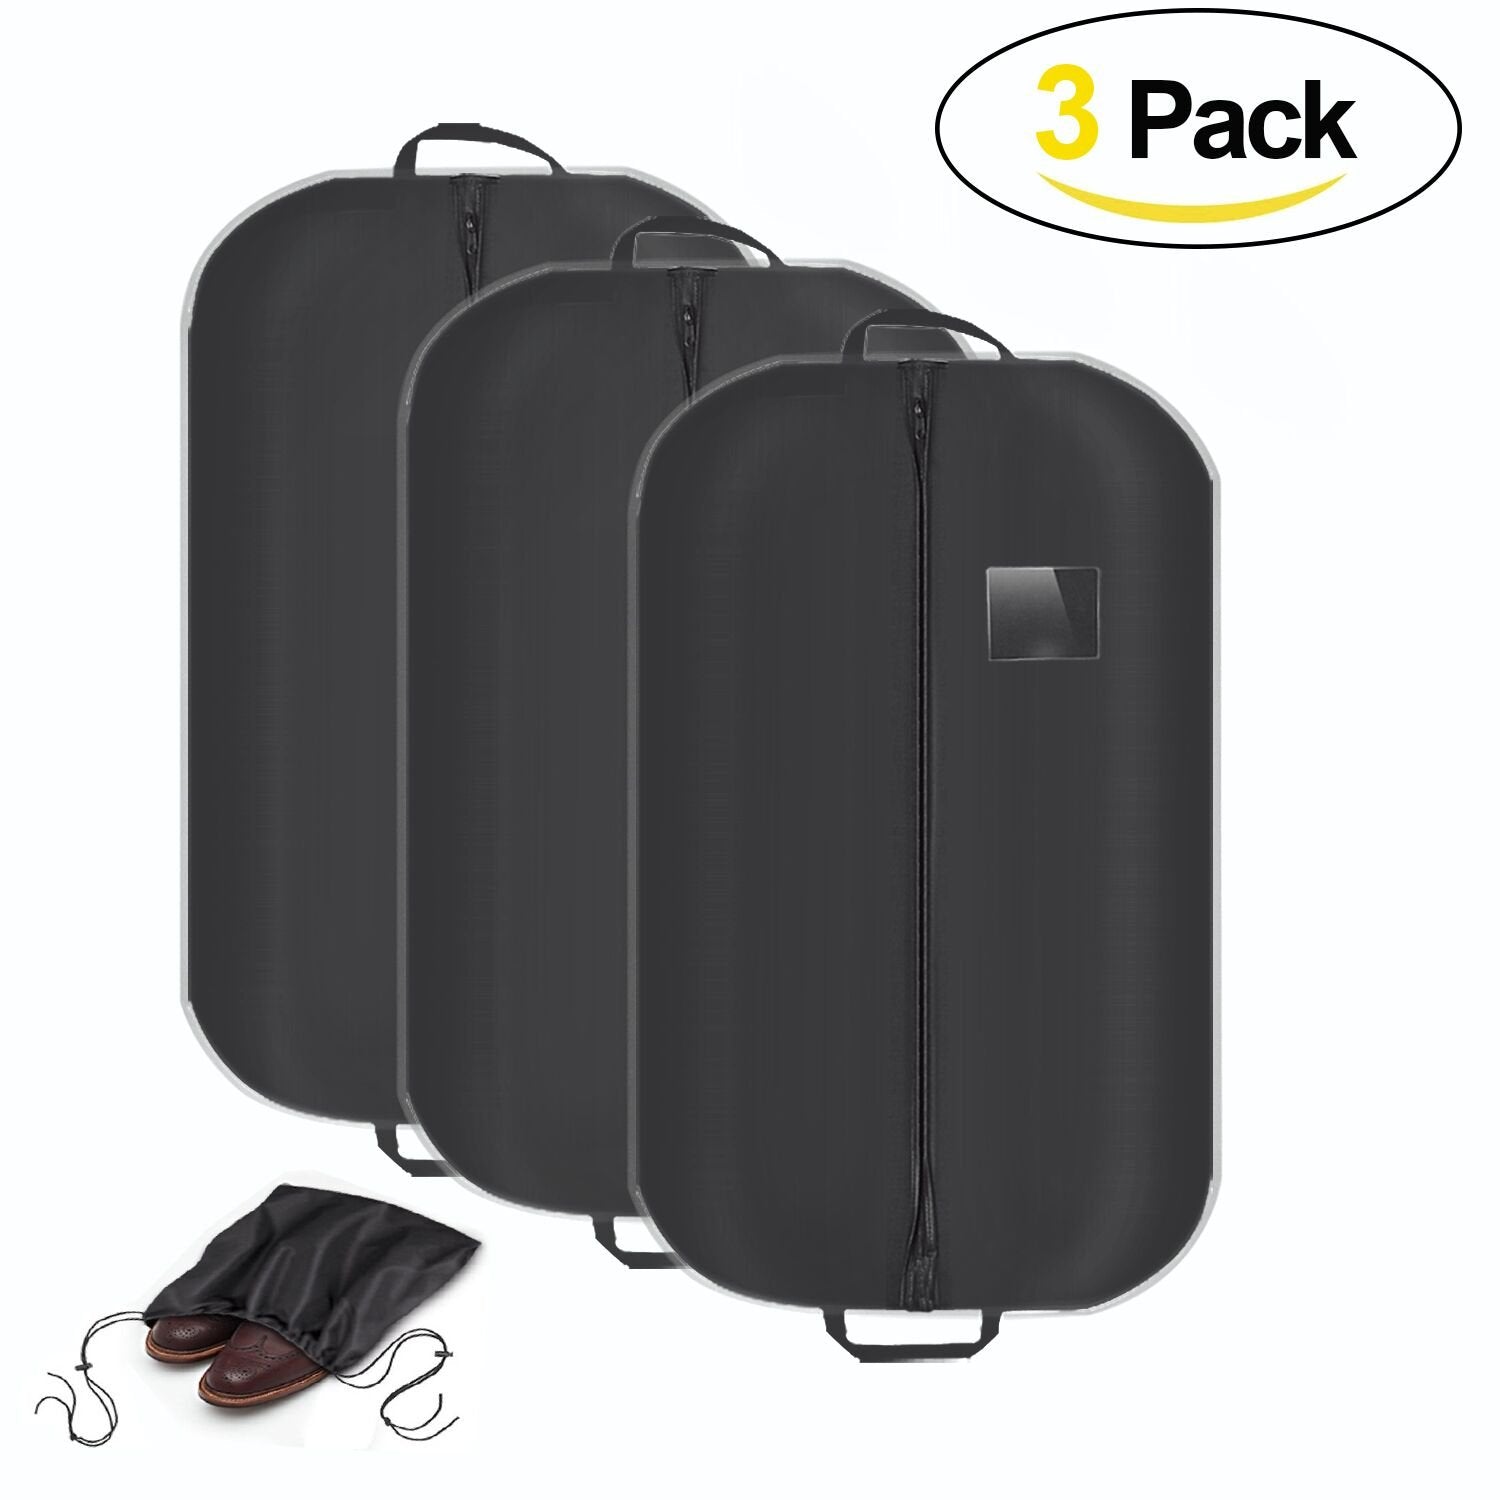 Suit Cover for closet Garment with Zip,Shoulder Bag Folding Zipped Black Suit Bags with Clear Window and 2 Handles for Storage or Travel,Pack of 3 …